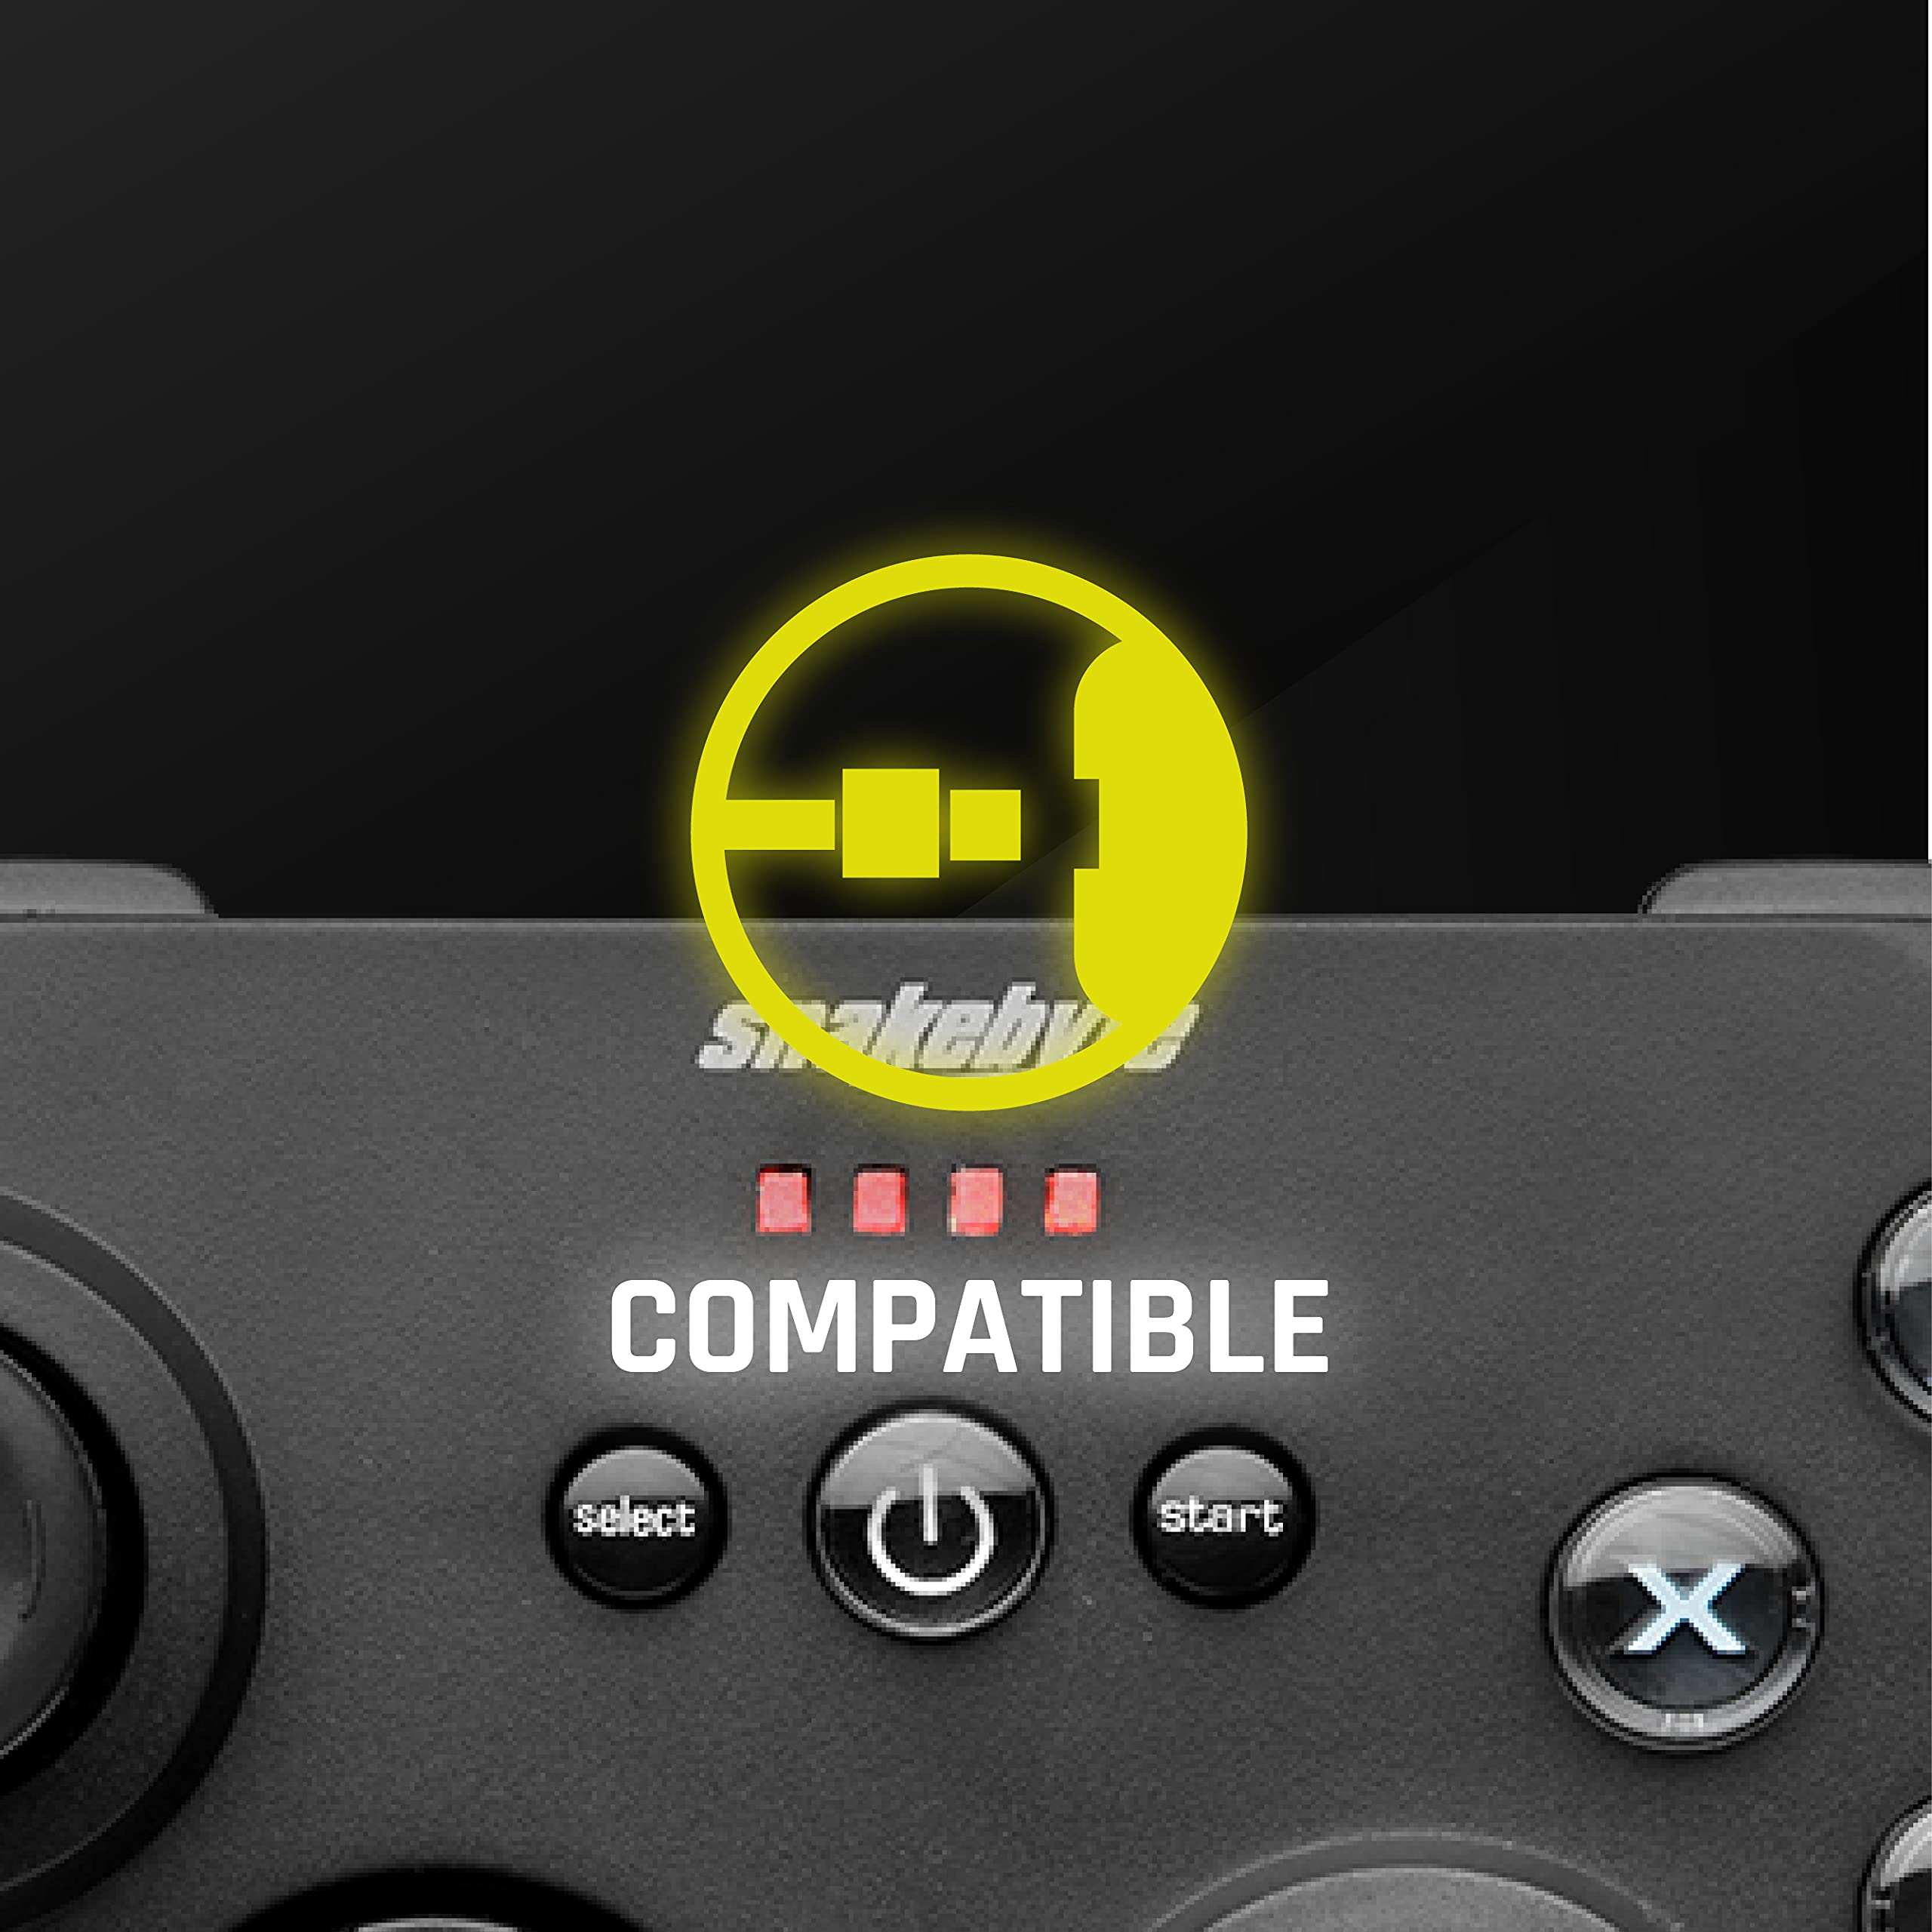 Snakebyte Snakebyte Game Pad Pro - Wireless 2.4Ghz Game Controller / Gamepad / Joystick for PC - PC; Mac; Linux